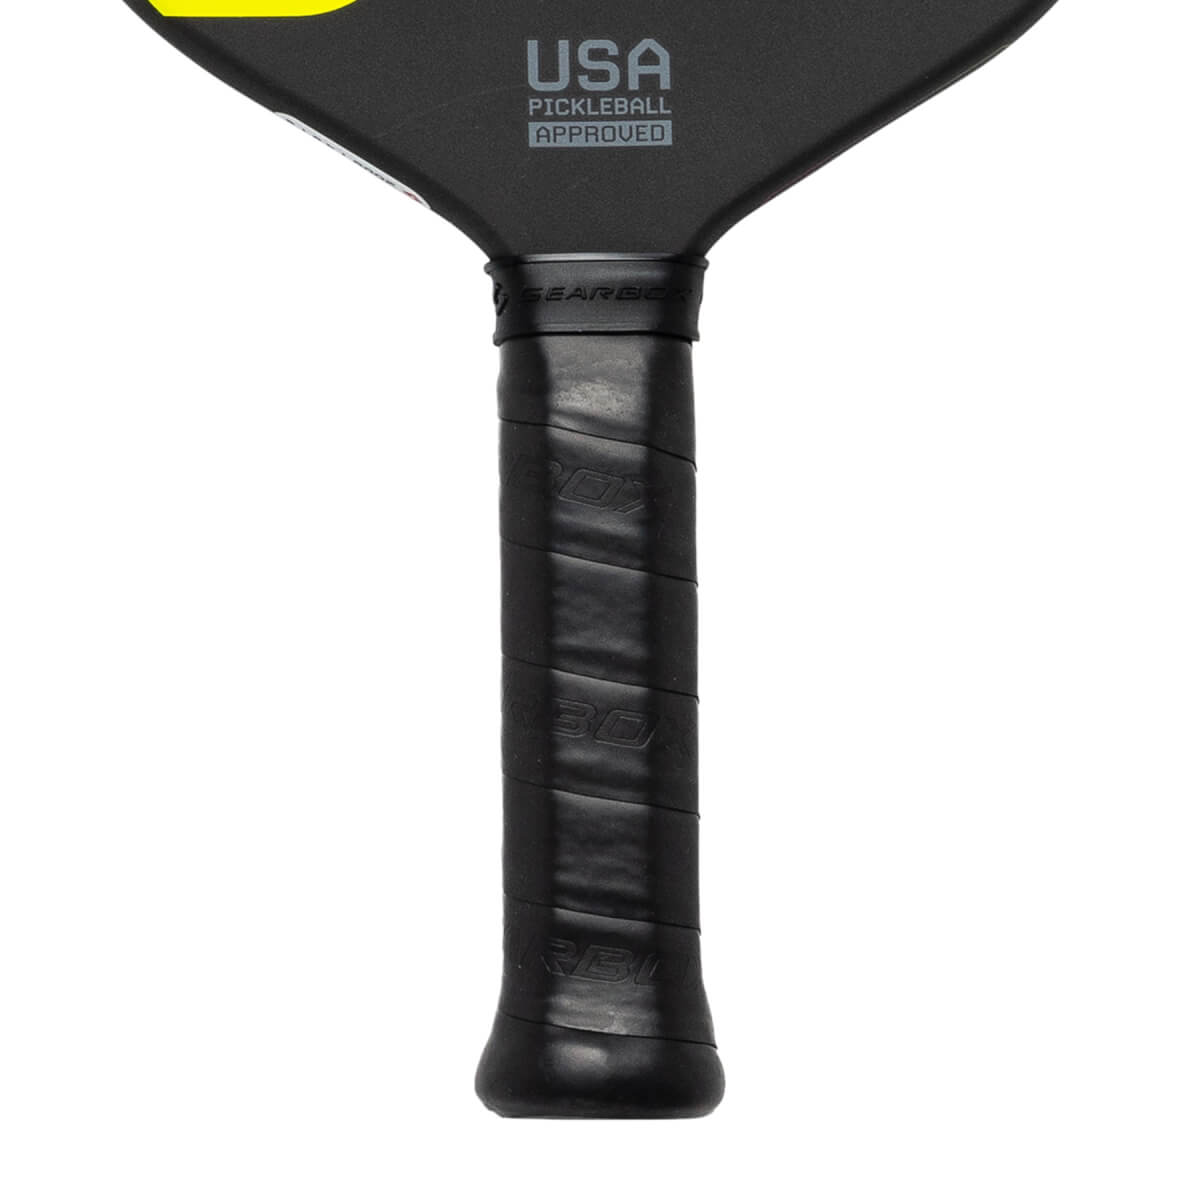 Gearbox Pickleball Paddle G2 Fusion (Integra) - 14mm - 8.0oz - 4" Grip